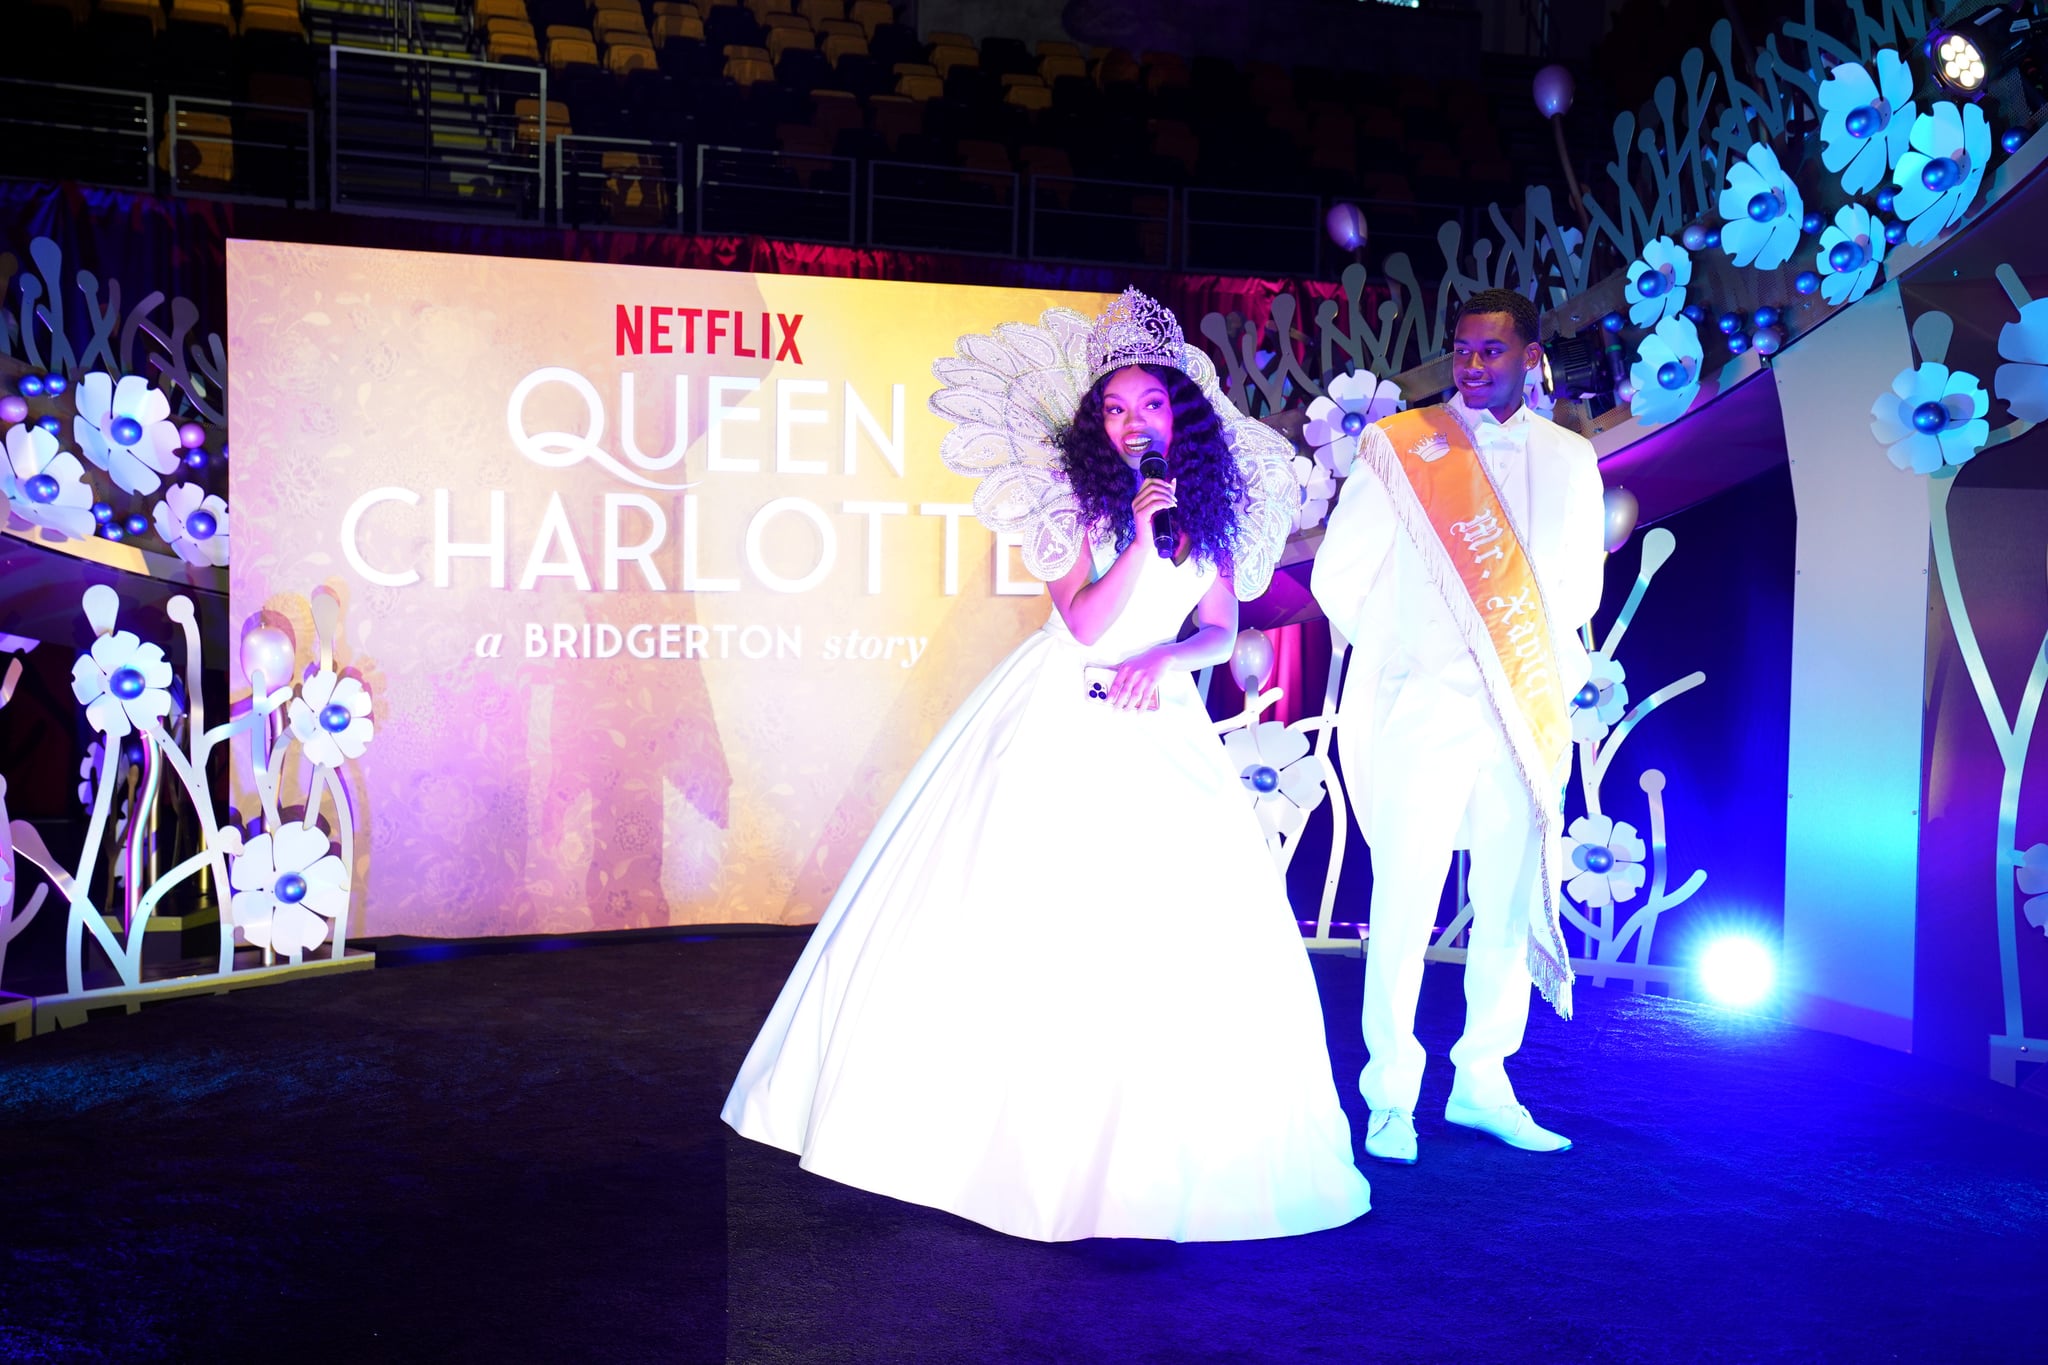 NEW ORLEANS, LOUISIANA - APRIL 15: (L-R) Miss Xavier University of Louisiana Nina Giddens and Mister Xavier University of Louisiana Zion Rouege attend the Queen Charlotte Spring Waltz at Xavier University on April 15, 2023 in New Orleans, Louisiana. (Photo by Erika Goldring/Getty Images for Netflix)